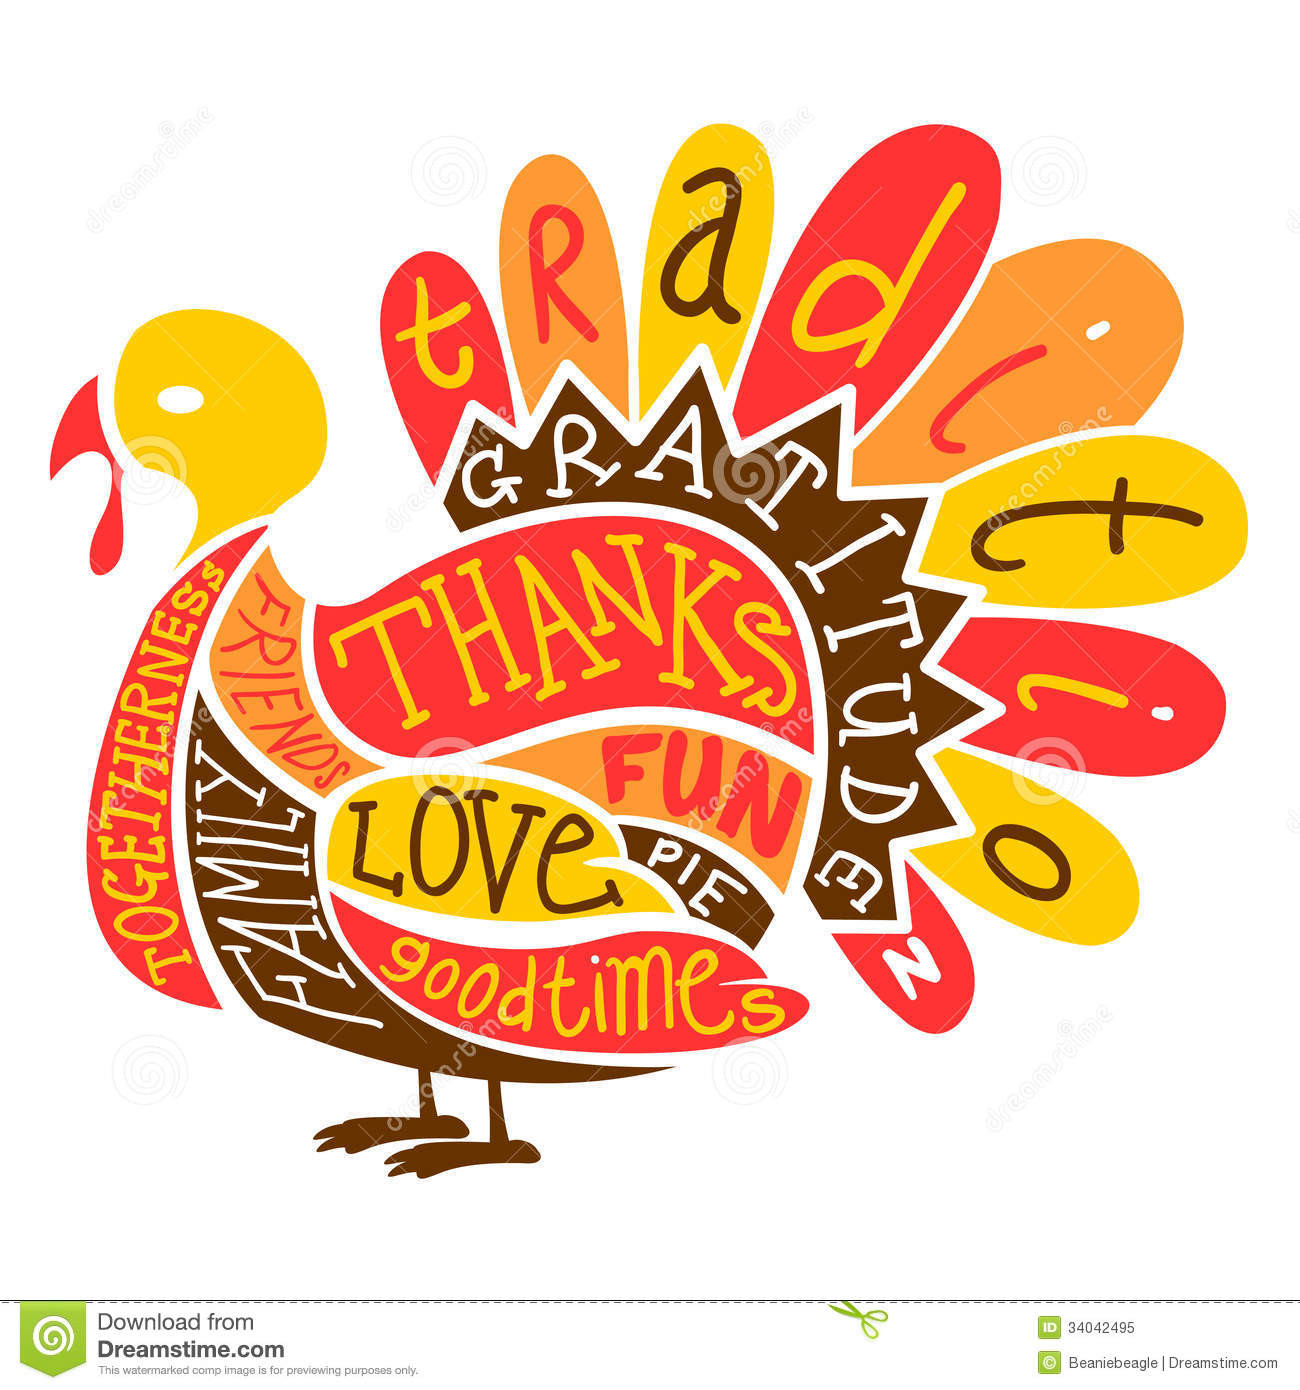 Thanksgiving Turkey Image
 New column “ Thanksgiving I’m thankful for the words